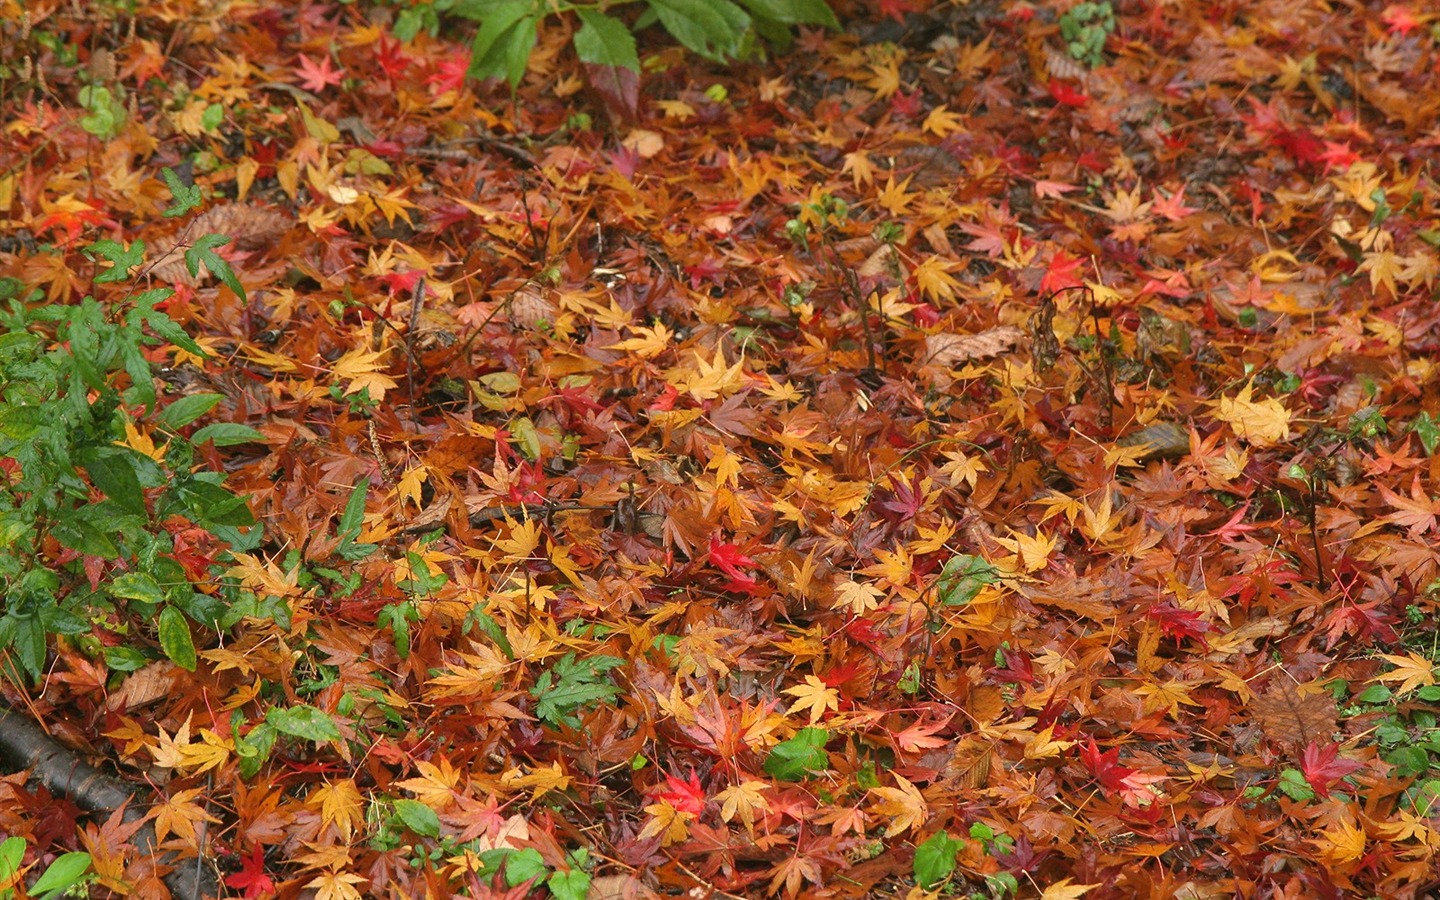 Maple Leaf wallpaper paved way #6 - 1440x900